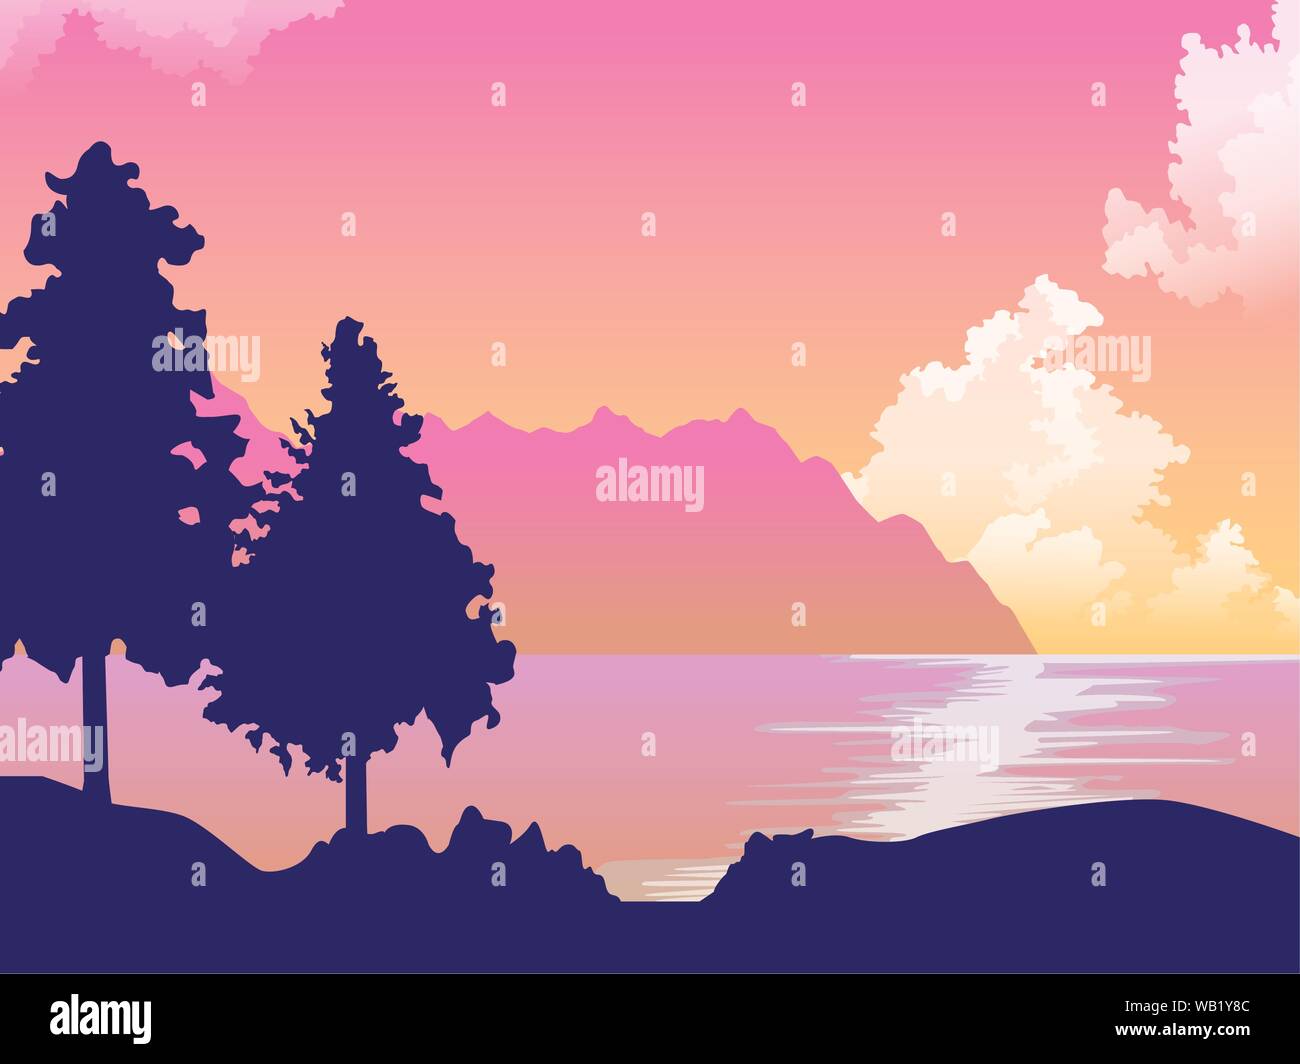 Beautiful Nature Landscape Drawing Scenery Stock Vector Image Art Alamy Spring wallpaper for computer 55. https www alamy com beautiful nature landscape drawing scenery image264960092 html